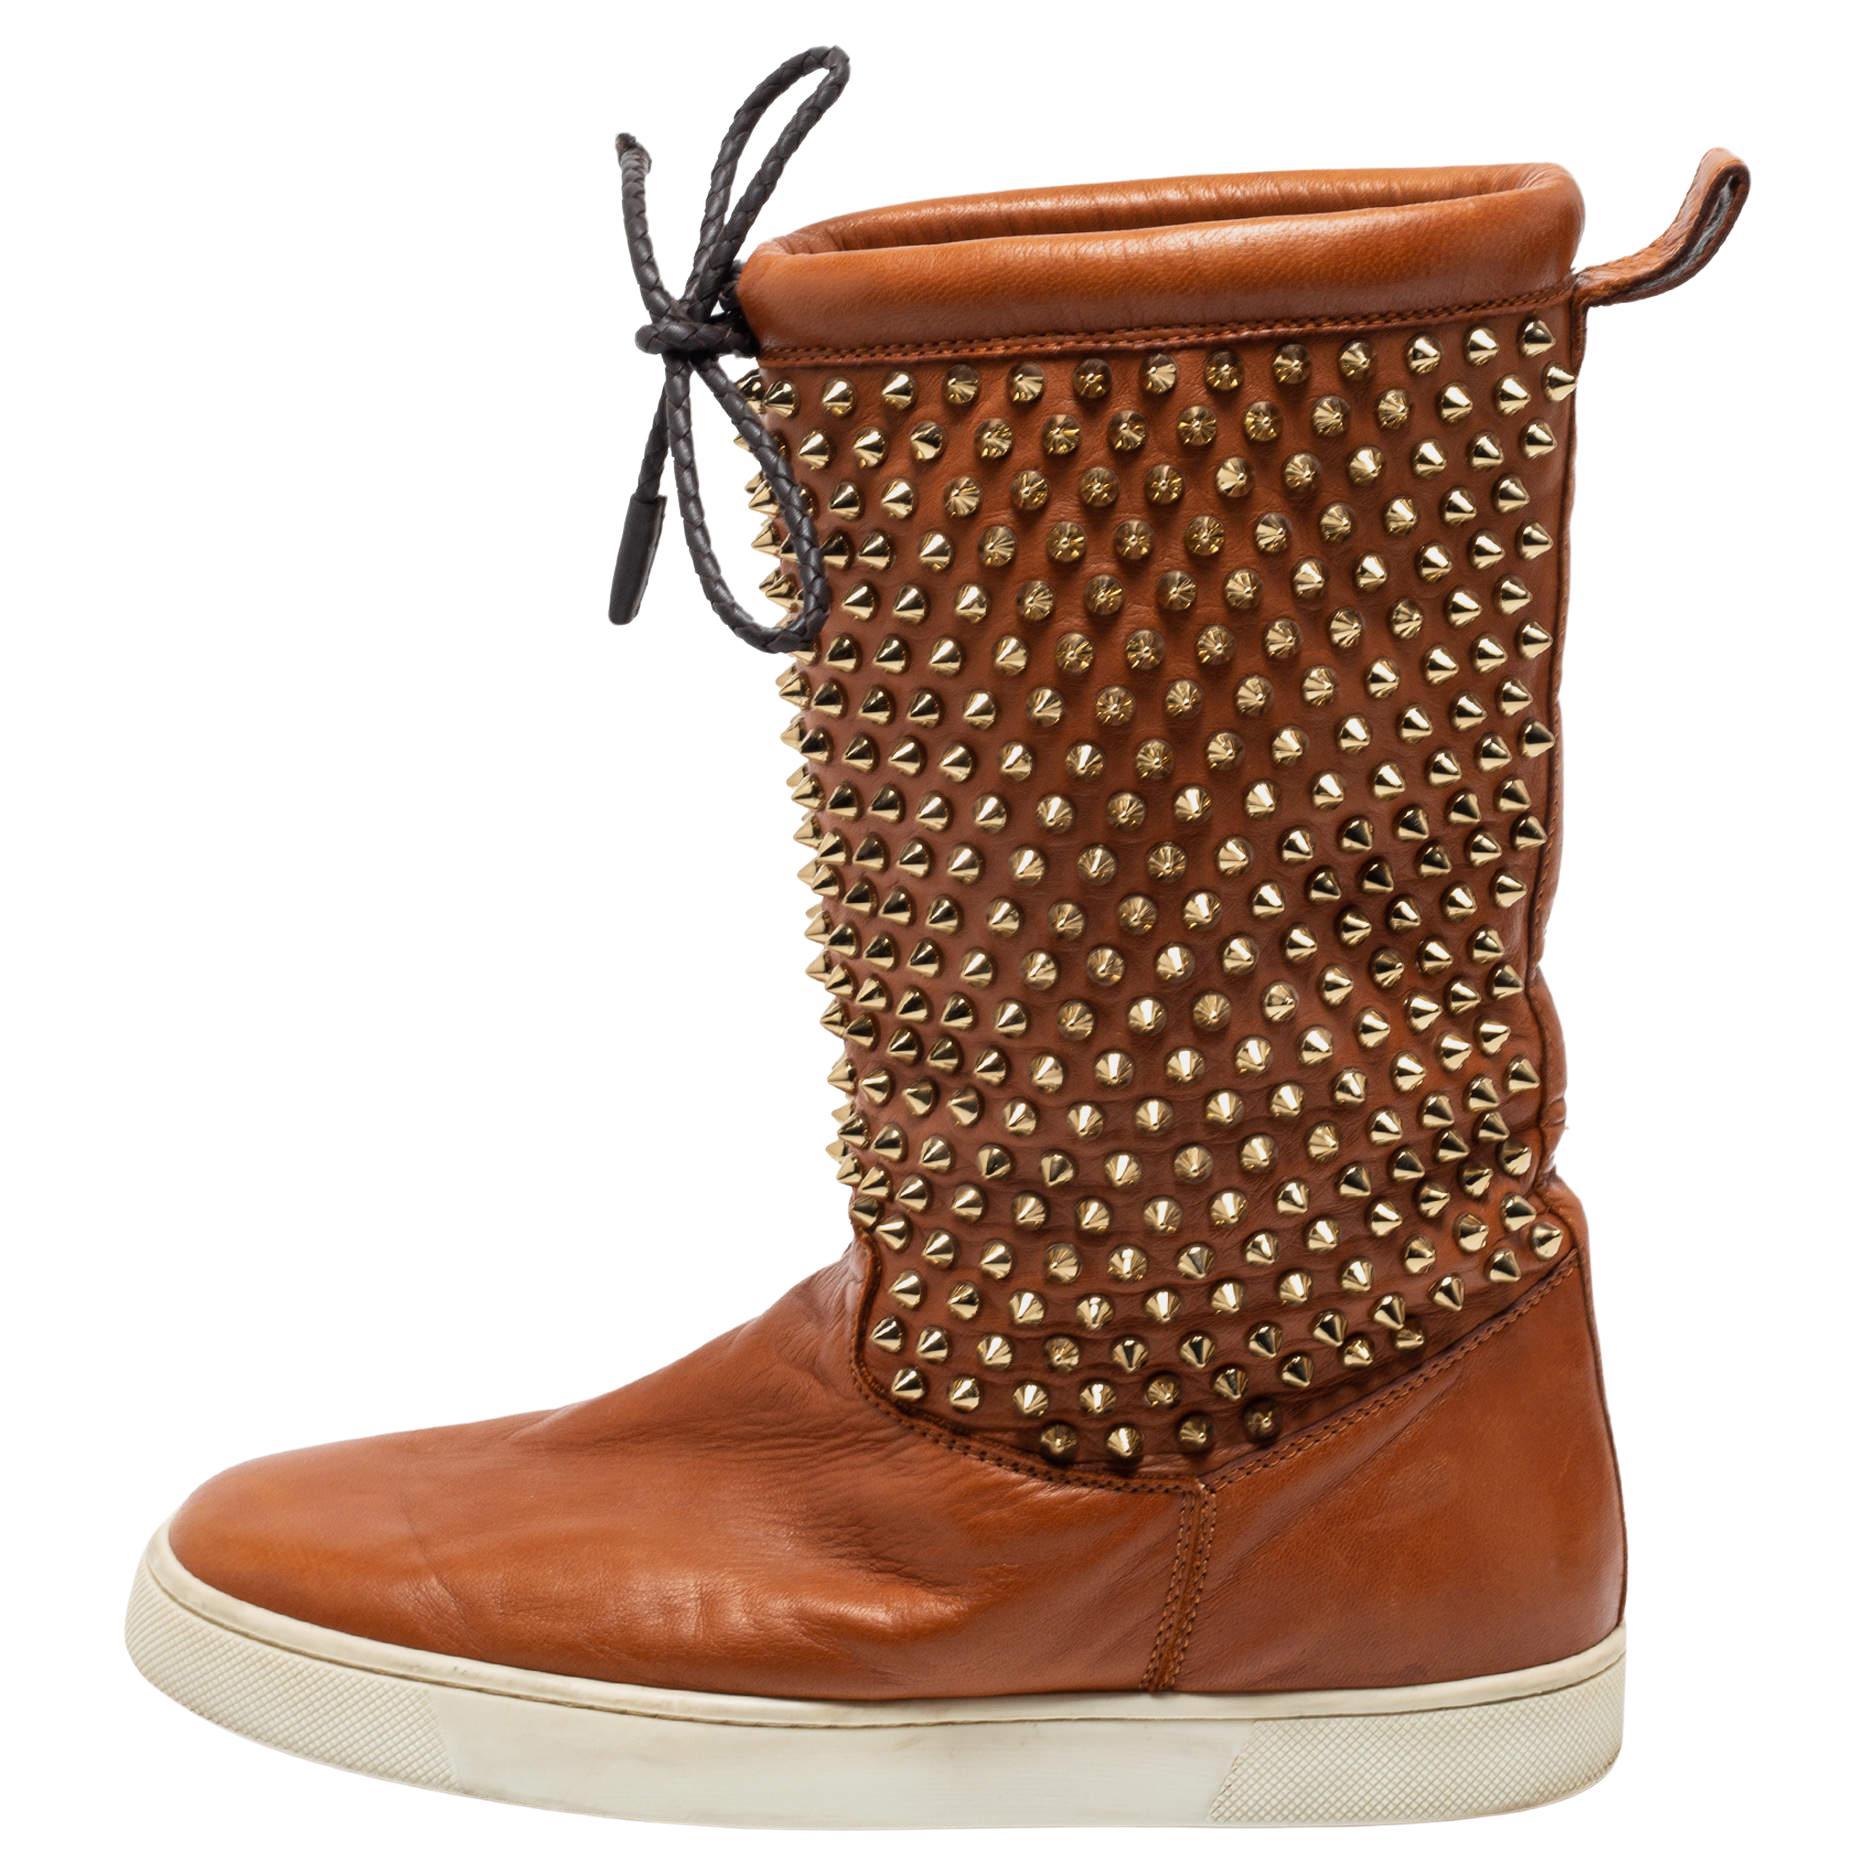 Christian Louboutin Brown Spiked Leather Surlapony Mid Calf Boots Size 38.5 For Sale